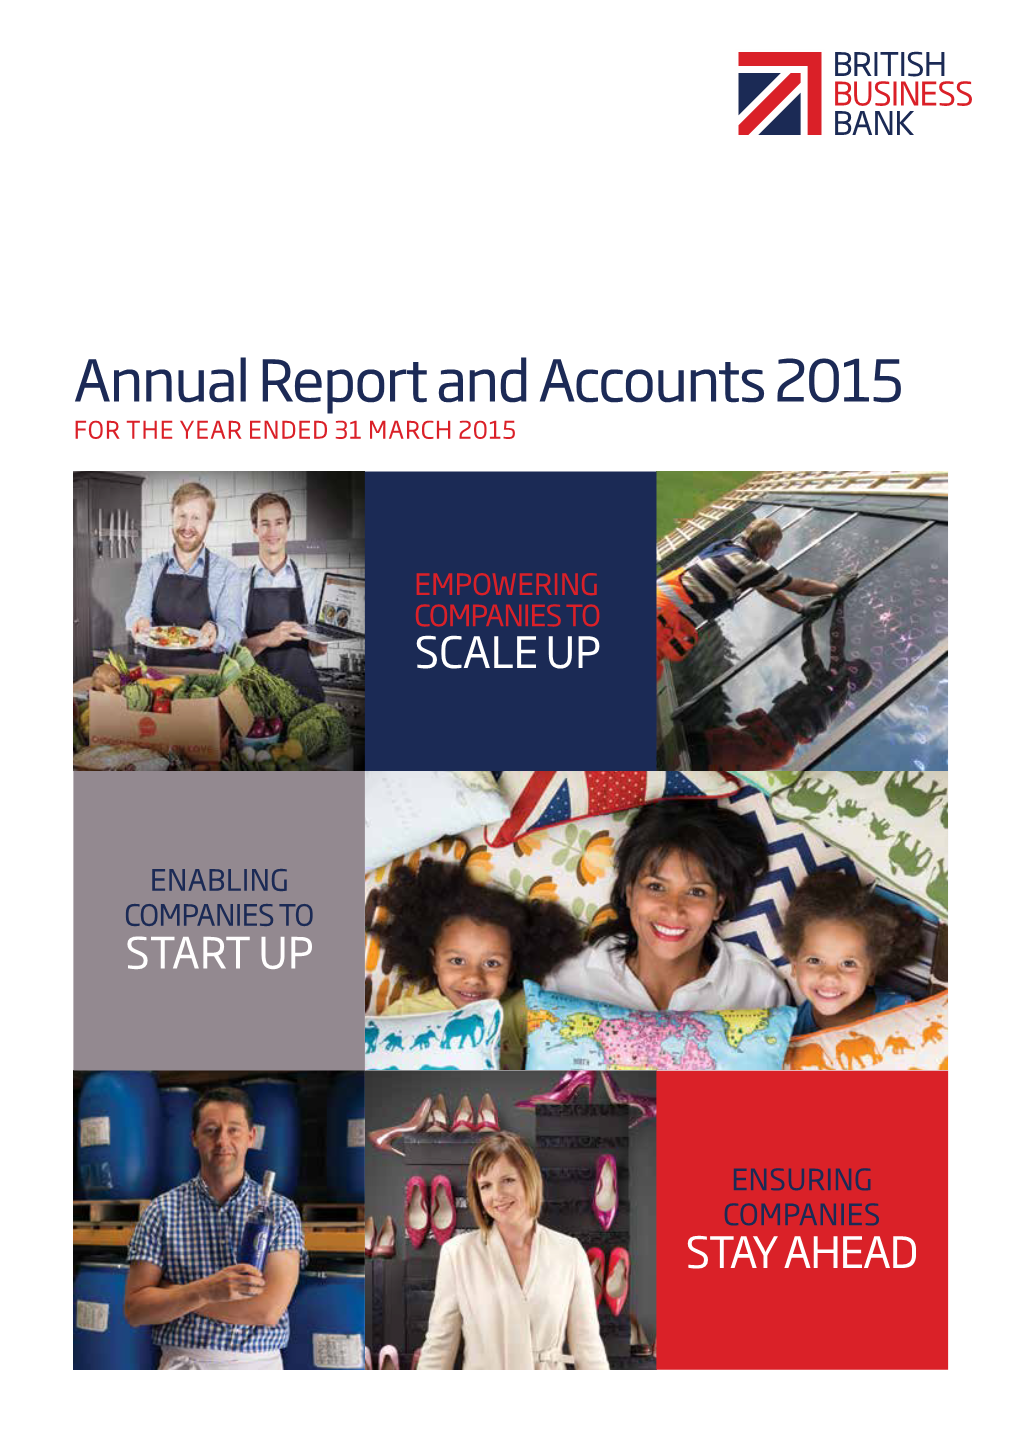 Annual Report and Accounts 2015 for the YEAR ENDED 31 MARCH 2015